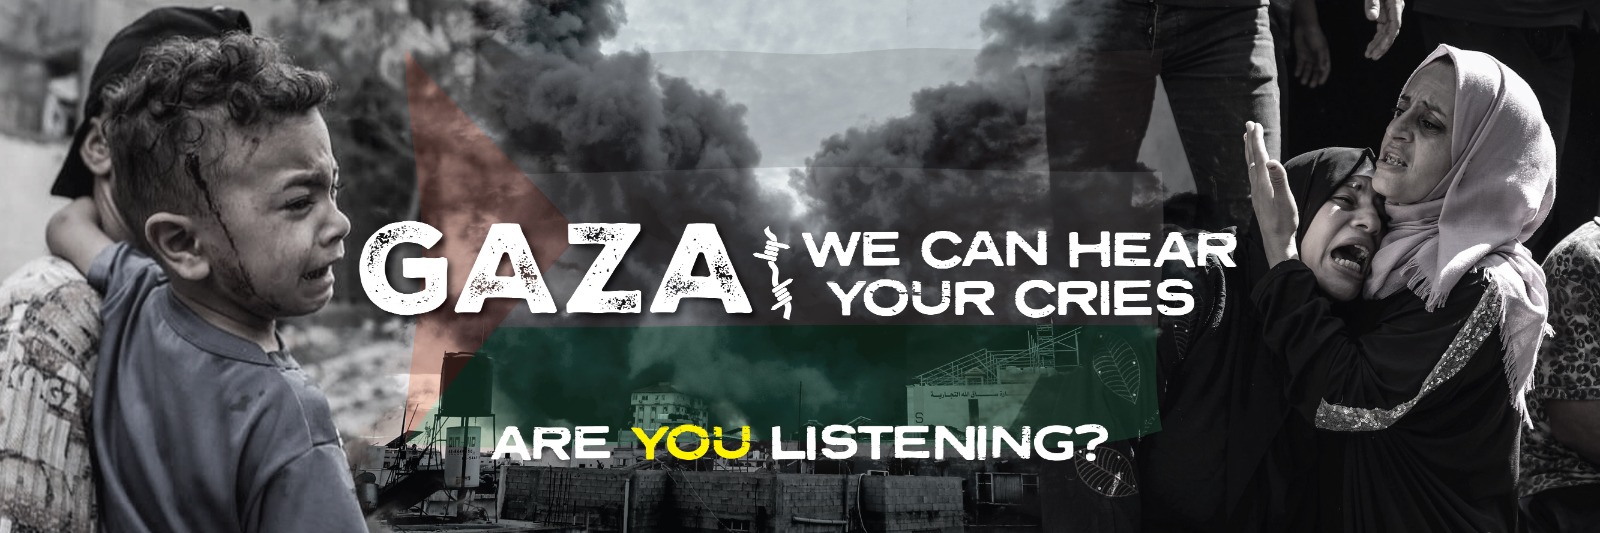 Gaza we can hear your CRIES and we are listening